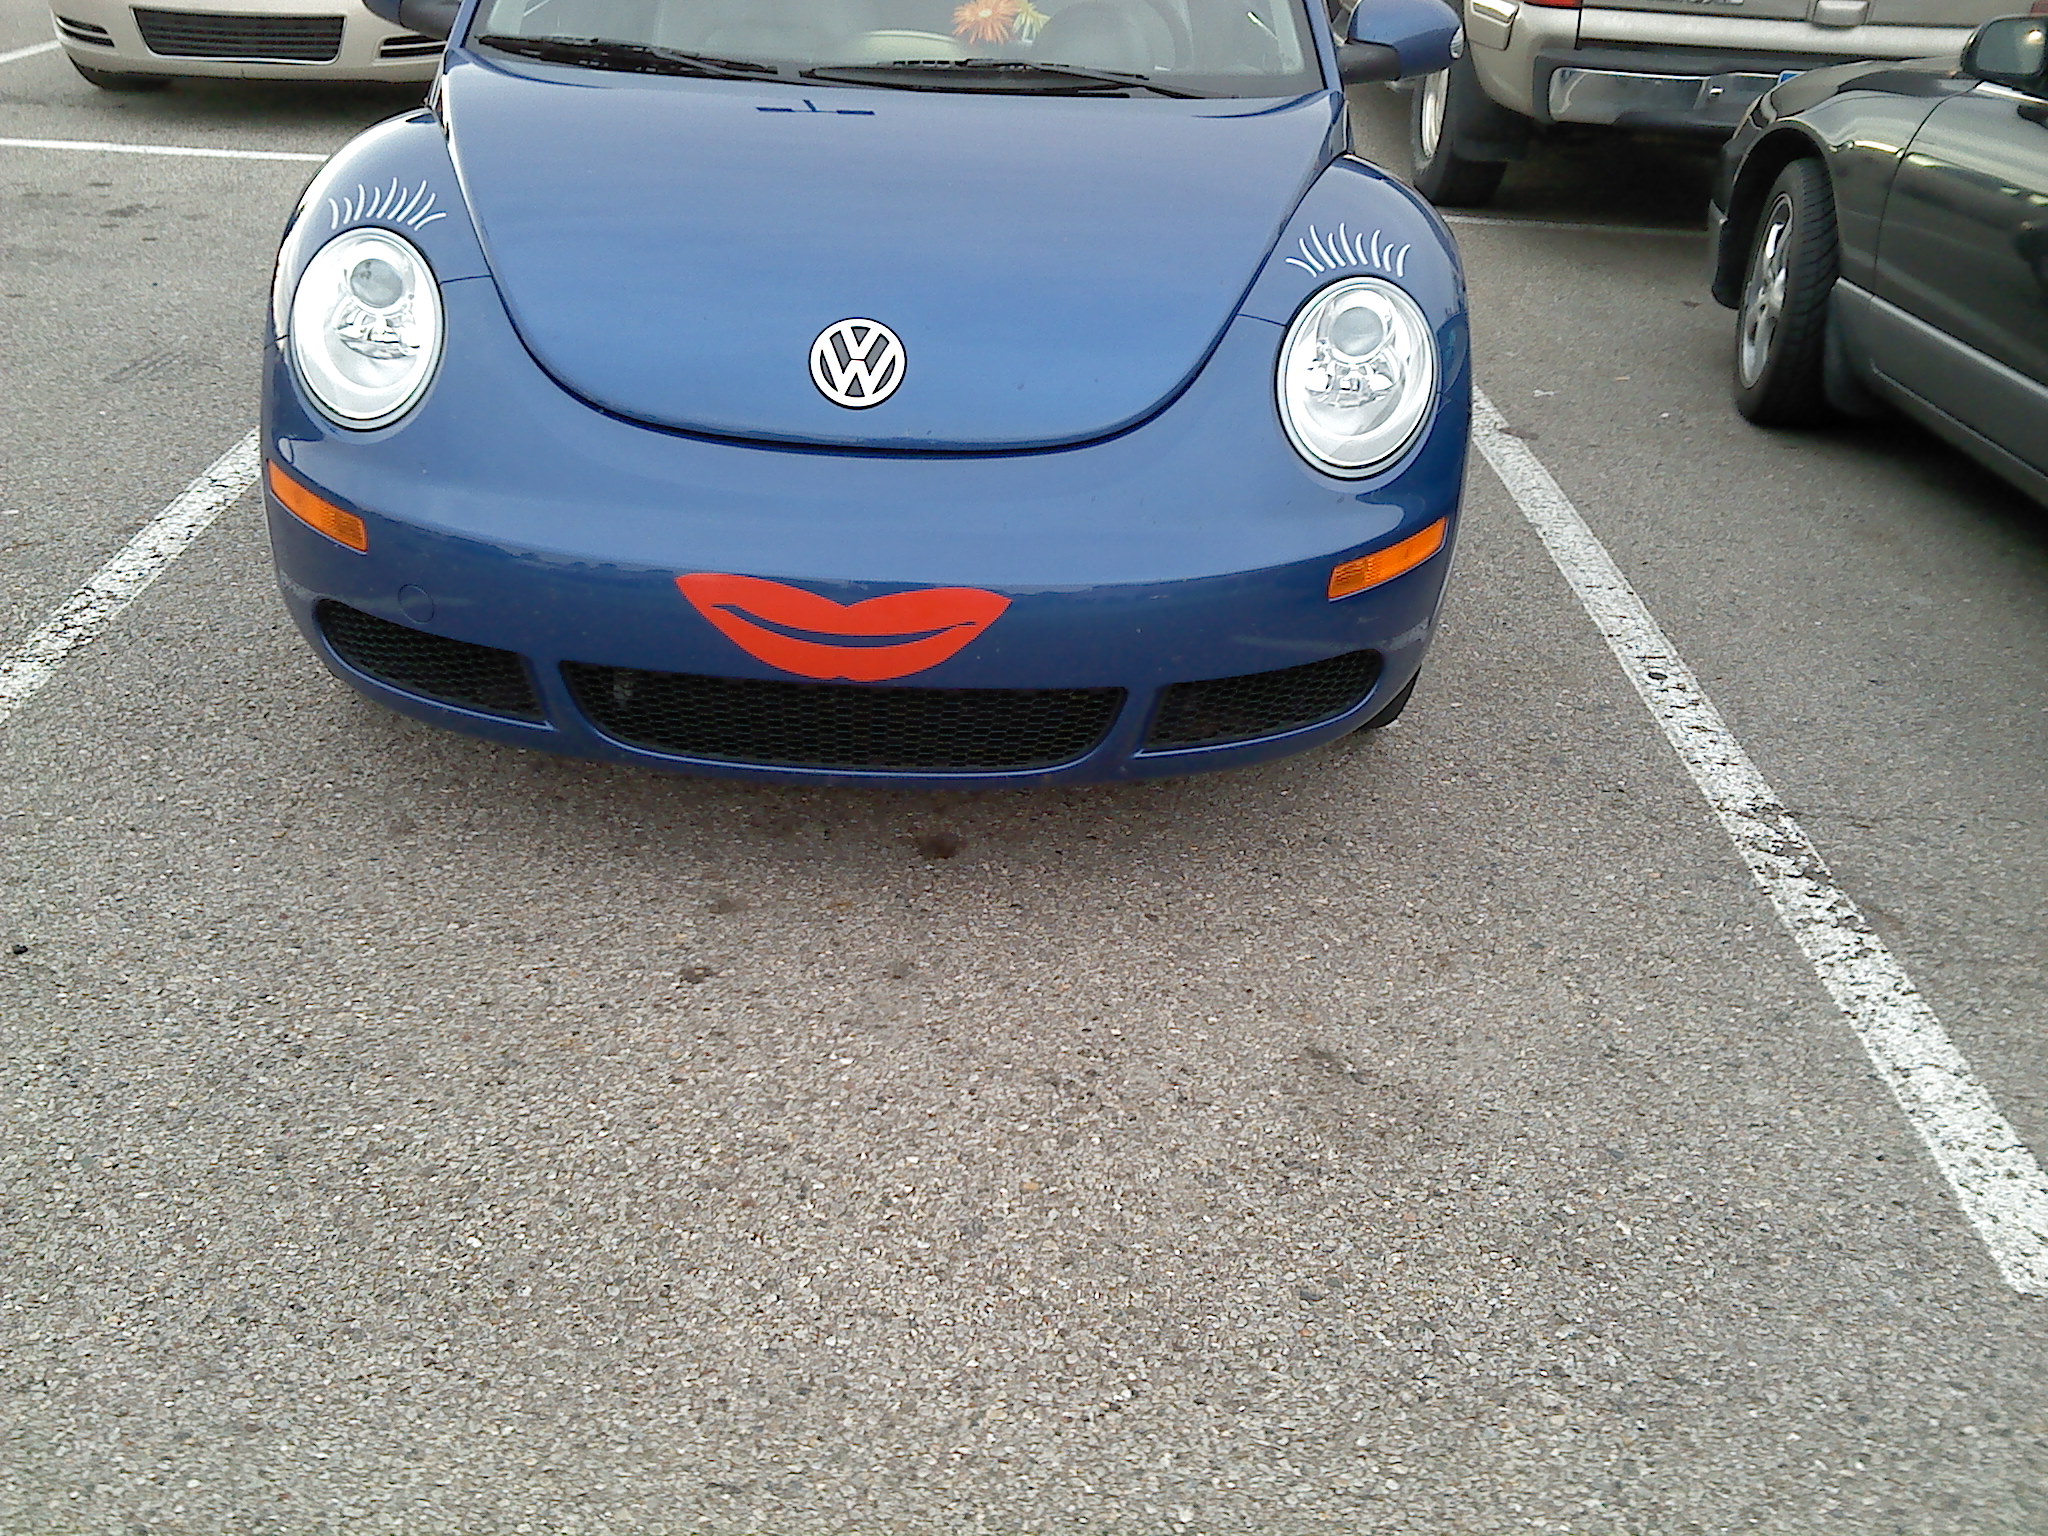 VW Beetle Bug Smile Face (Eye Lashes and Lips) Graphics